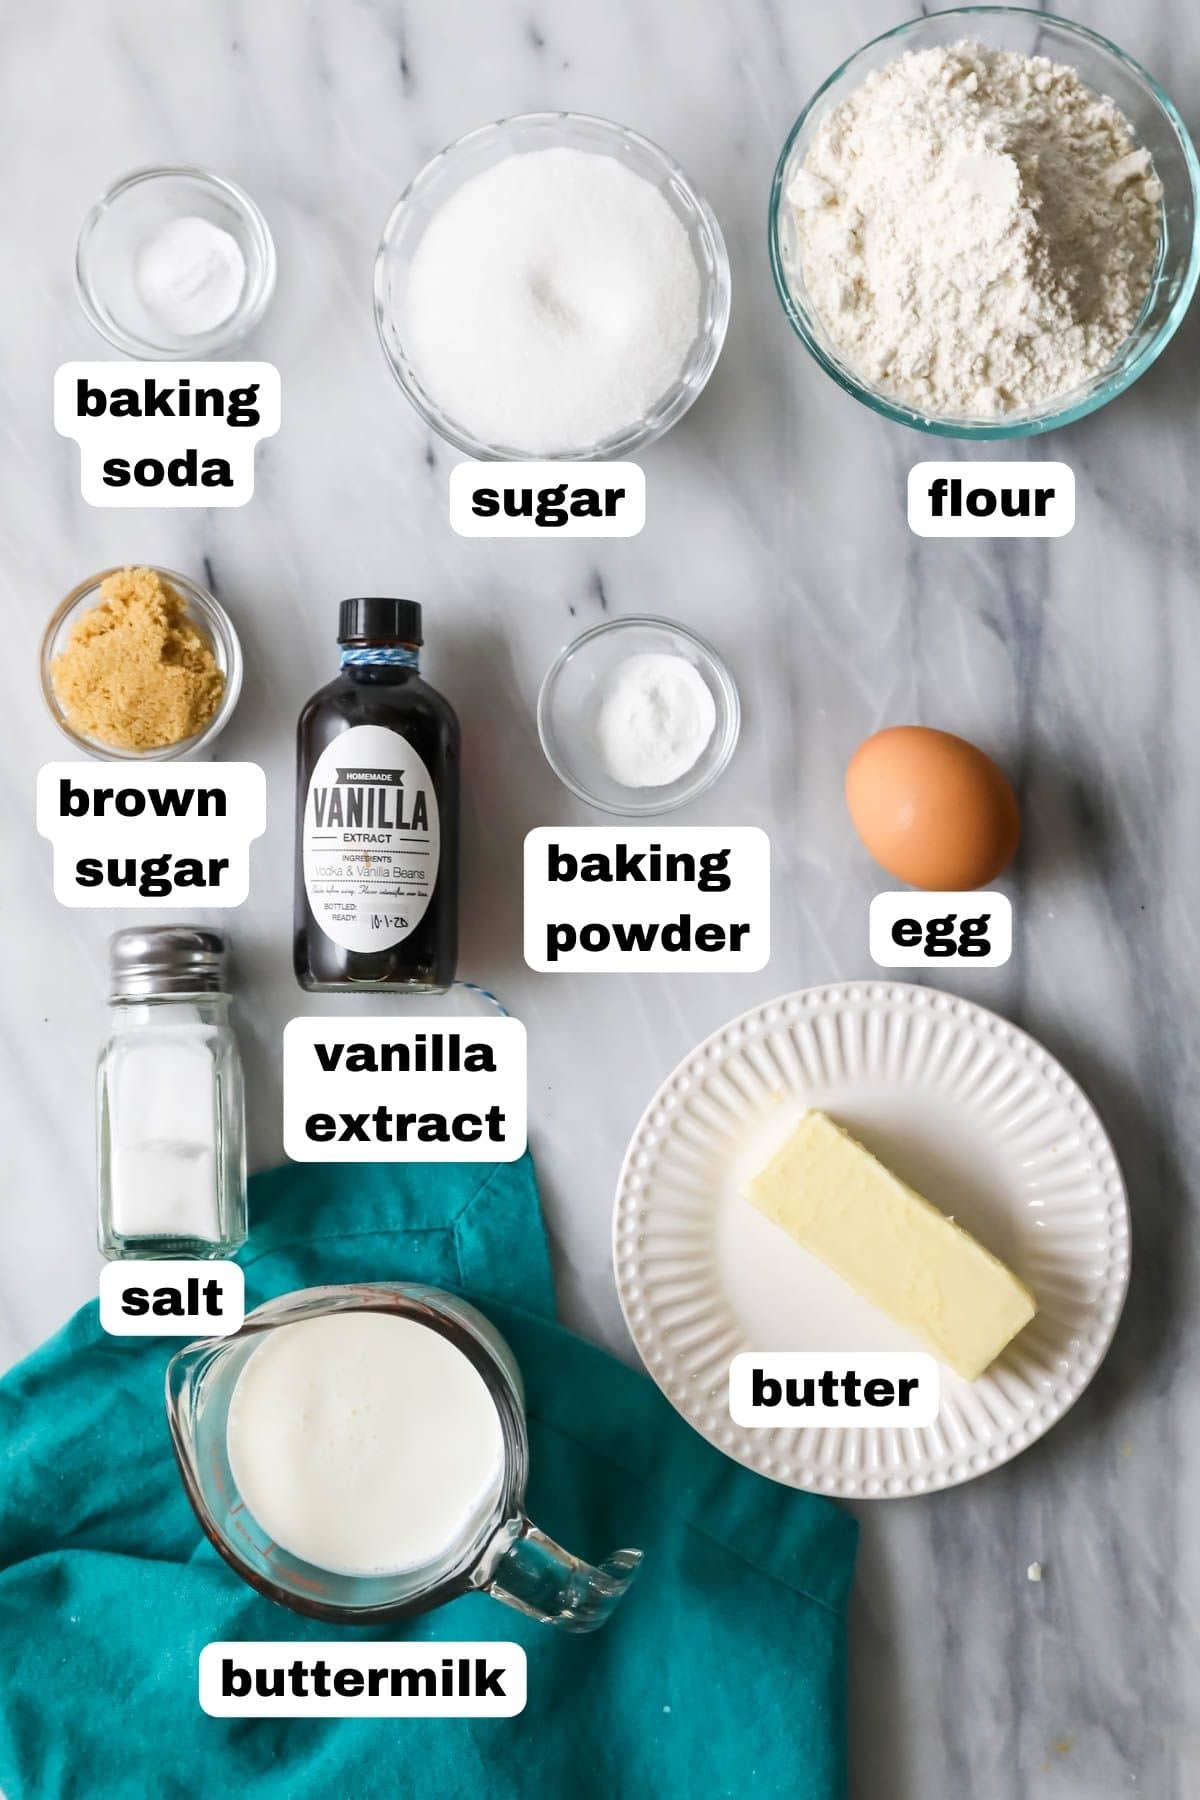 Overhead view of labelled ingredients including flour, vanilla, butter, brown sugar, and more.